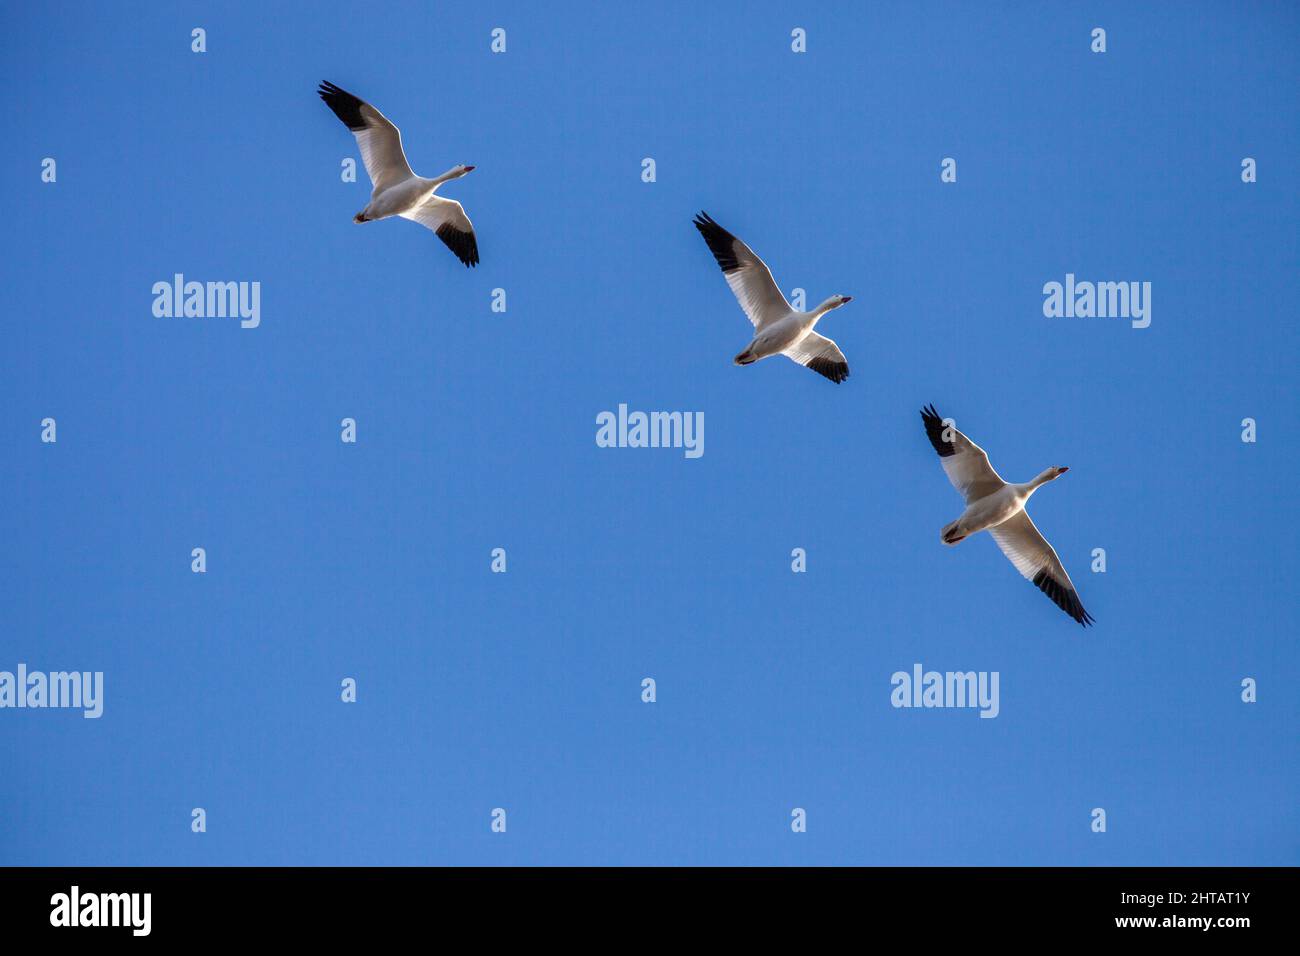 Snow Geese, Anser caerulescens, make a stop during there annual migration at Middle Creek Wildlife Management Area in Stevens, Pennsylvania U.S.A. Stock Photo